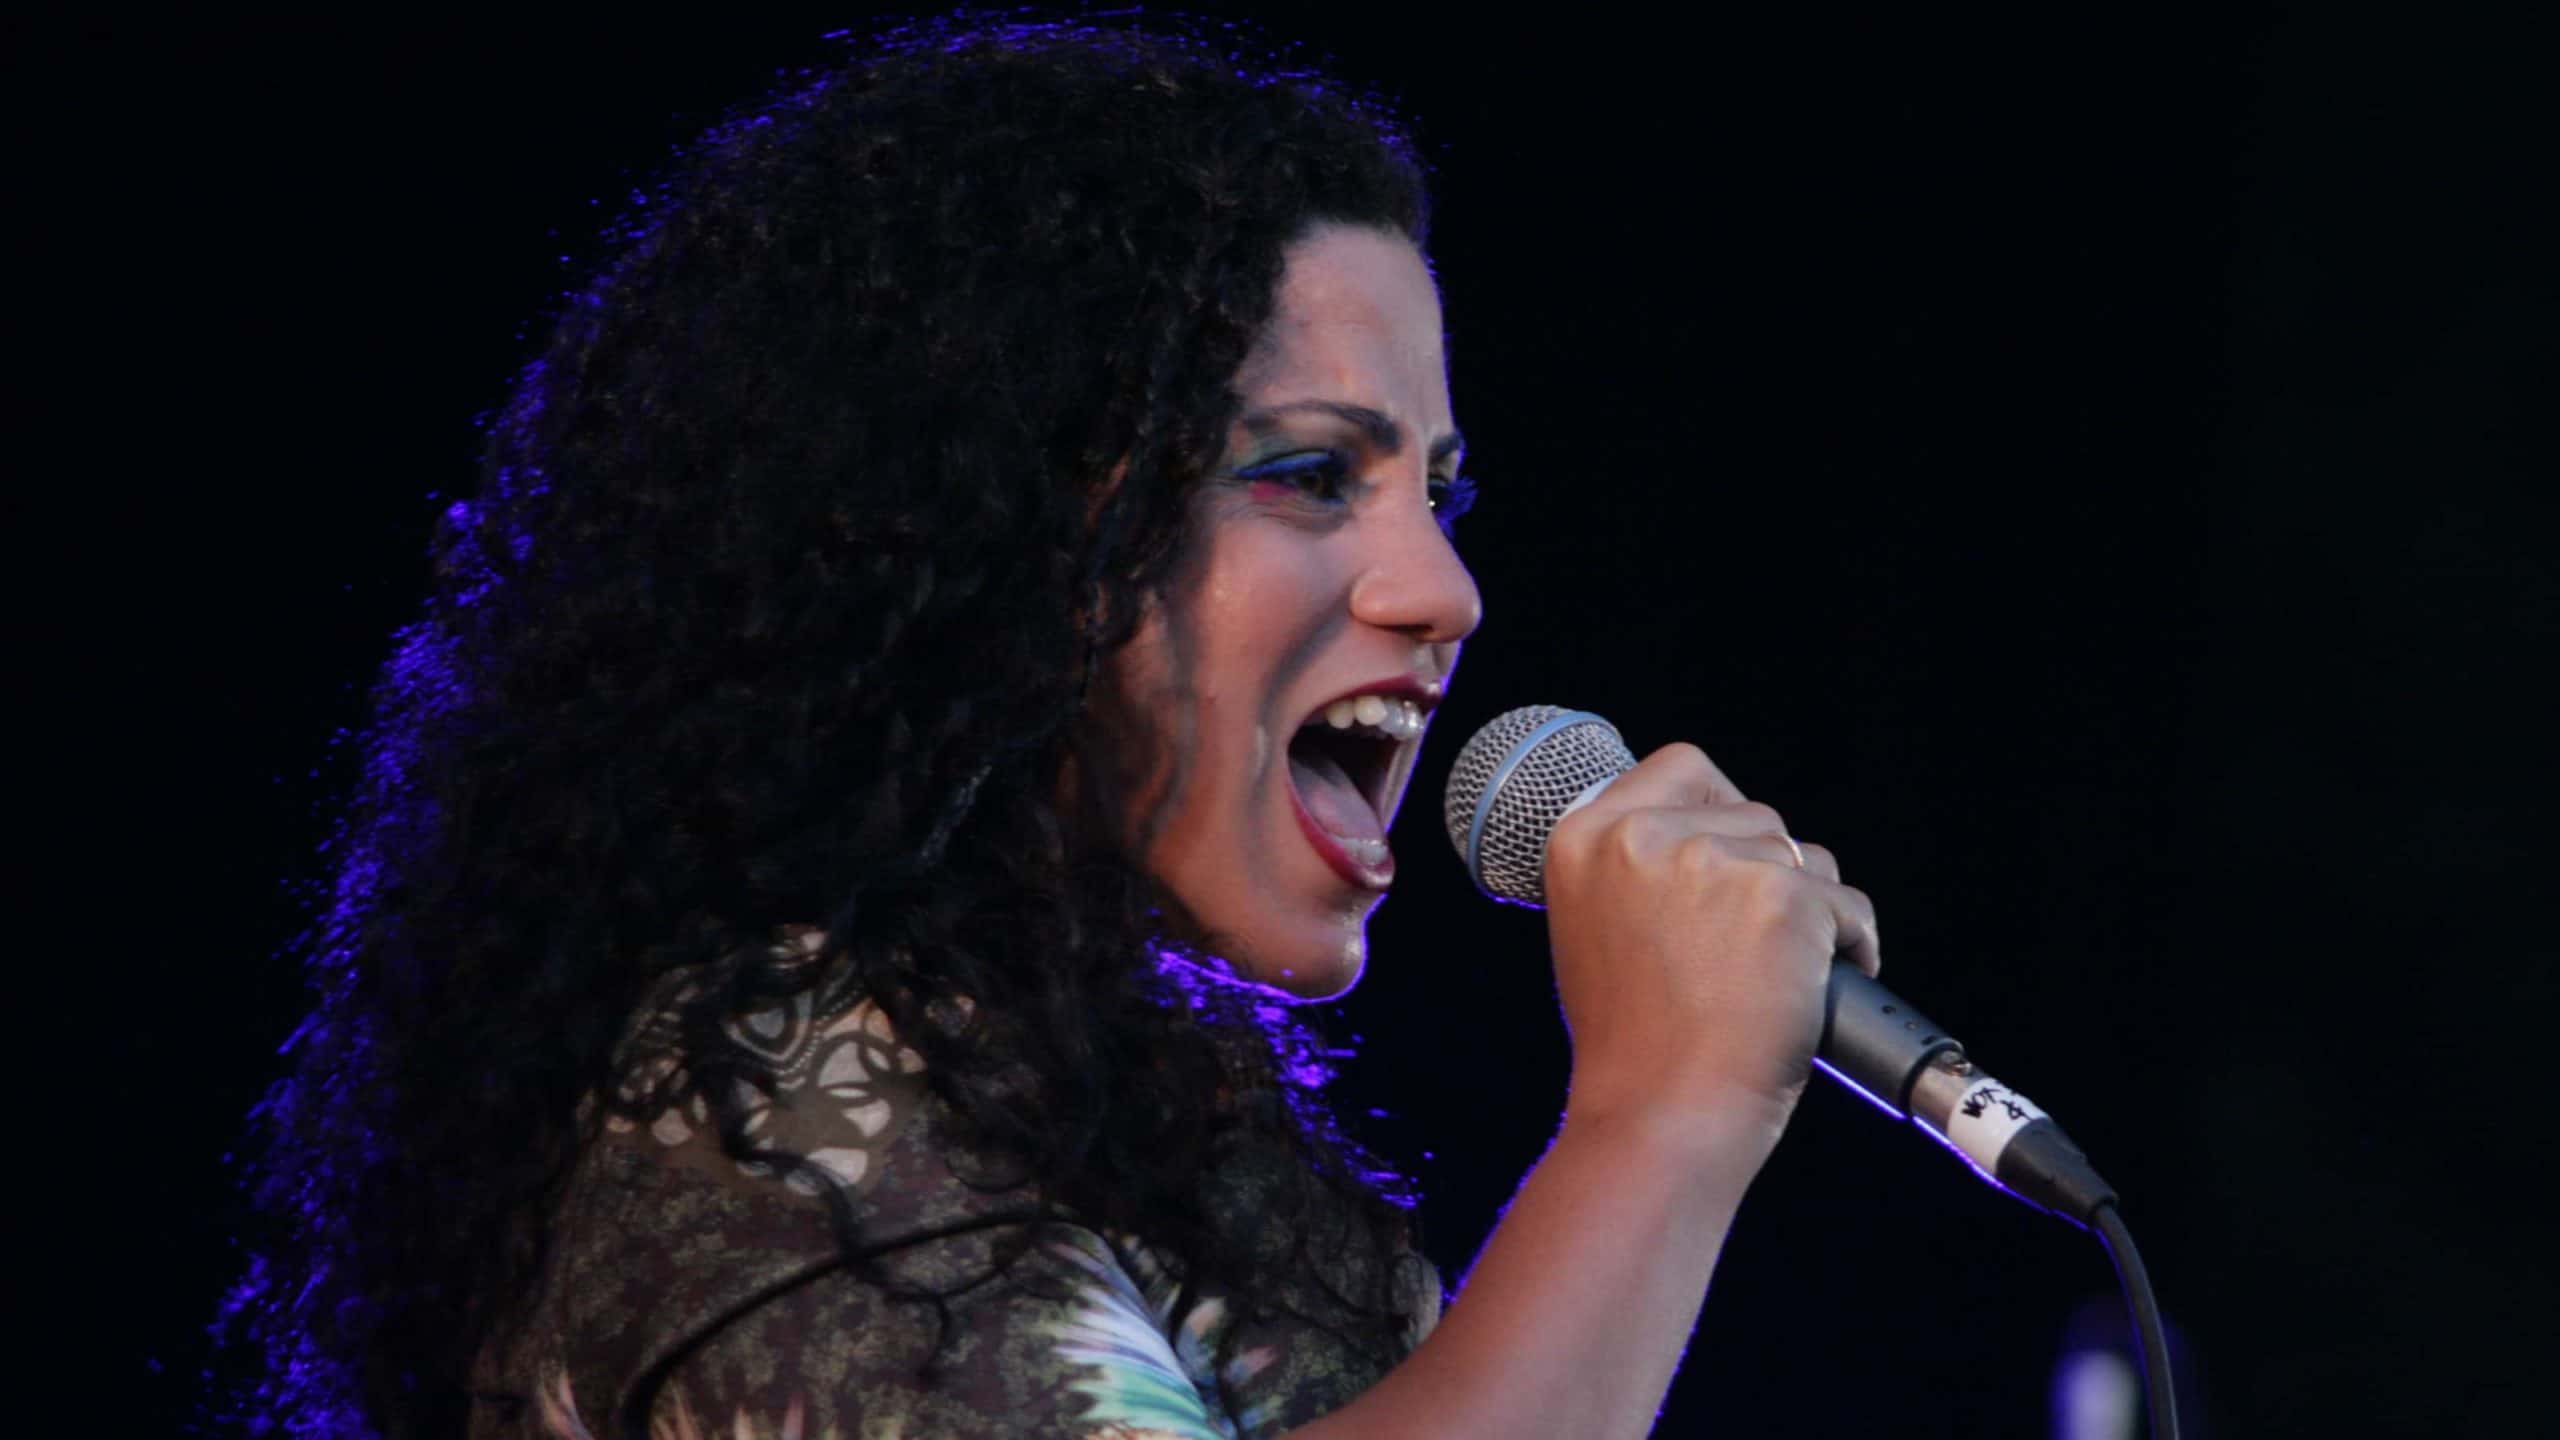 Tunisian singer-songwriter Emel Mathlouthi, who now lives in Brooklyn, N.Y., has appeared in the Berkshires at Massachusetts College of Liberal Arts and at Mass MoCA in North Adams.